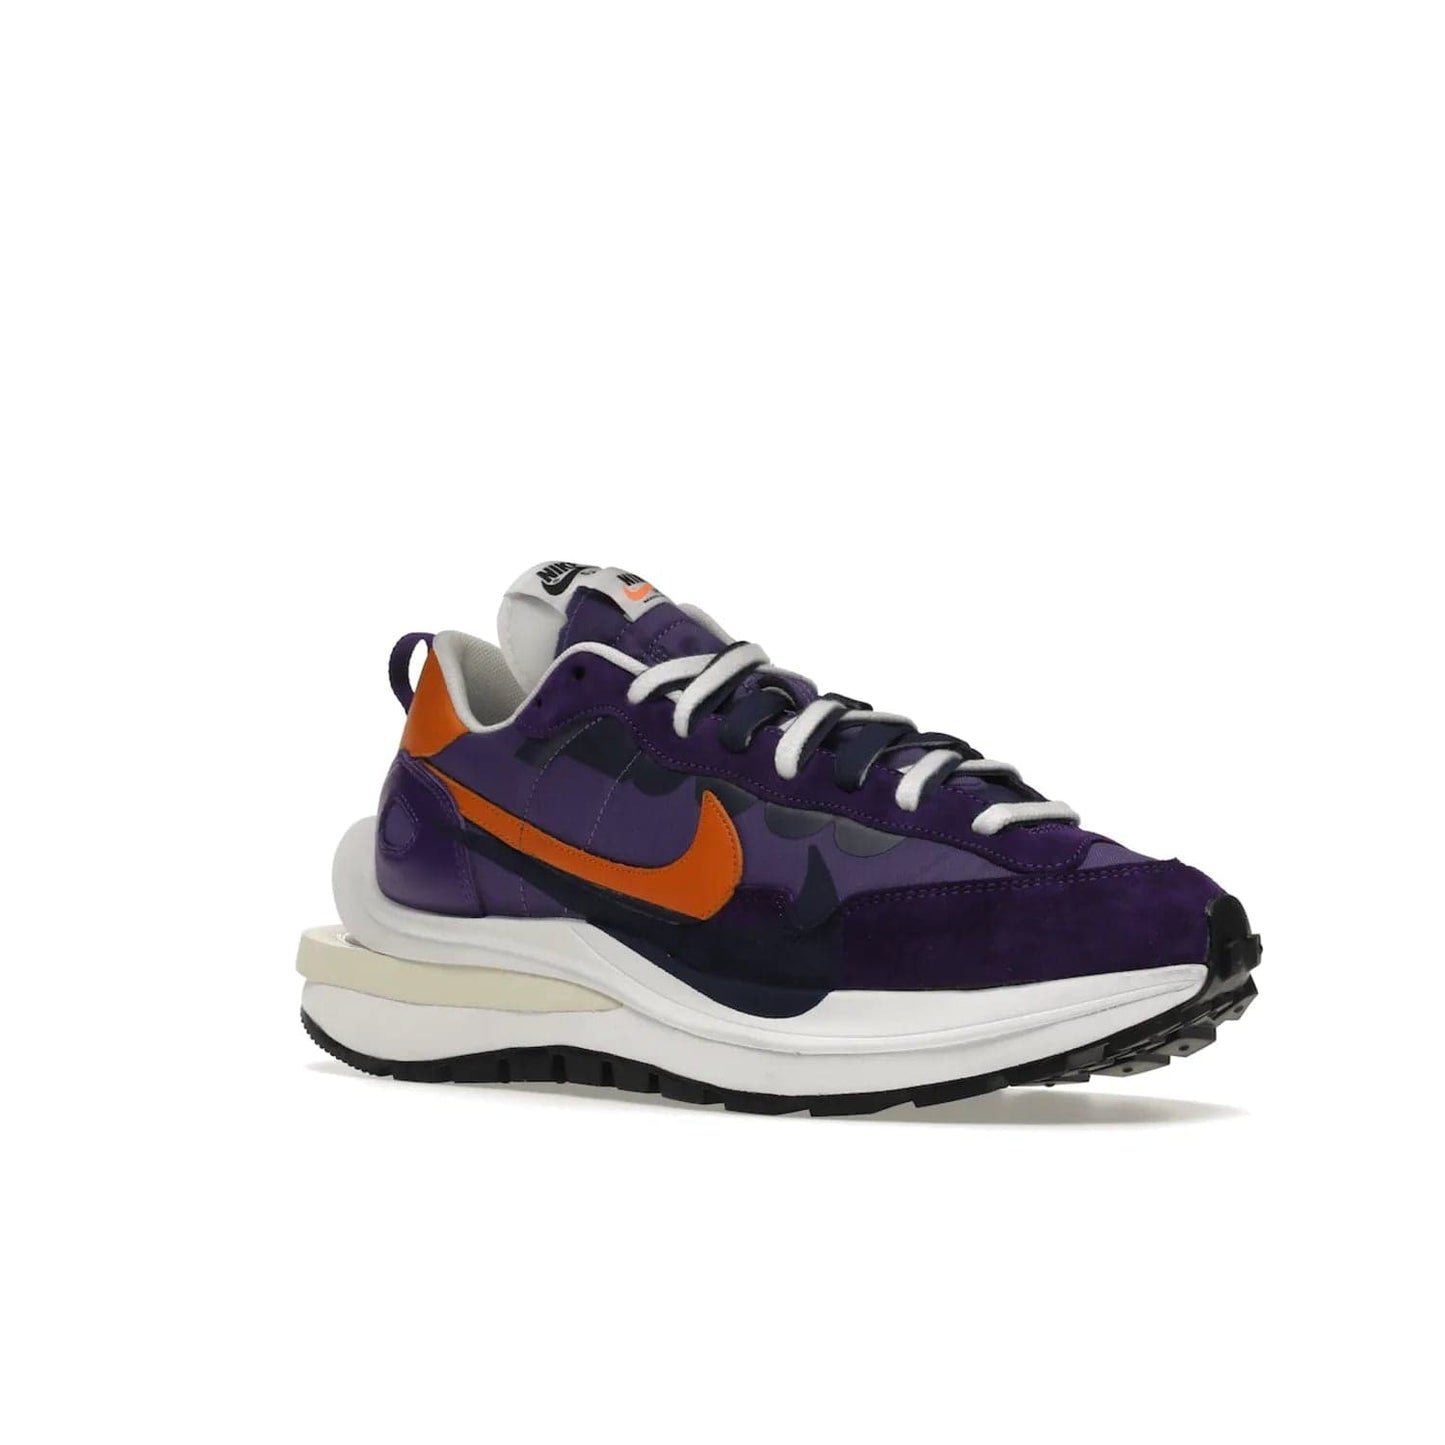 Nike Vaporwaffle sacai Dark Iris - Image 5 - Only at www.BallersClubKickz.com - Unique Nike Vaporwaffle sacai Dark Iris collab. Suede, leather & textile upper with Orange accents. Dual tongues & midsoles. Woven labels & heel tabs branding. Colorway of Purple, Orange, White & Black. Must-have for any wardrobe.